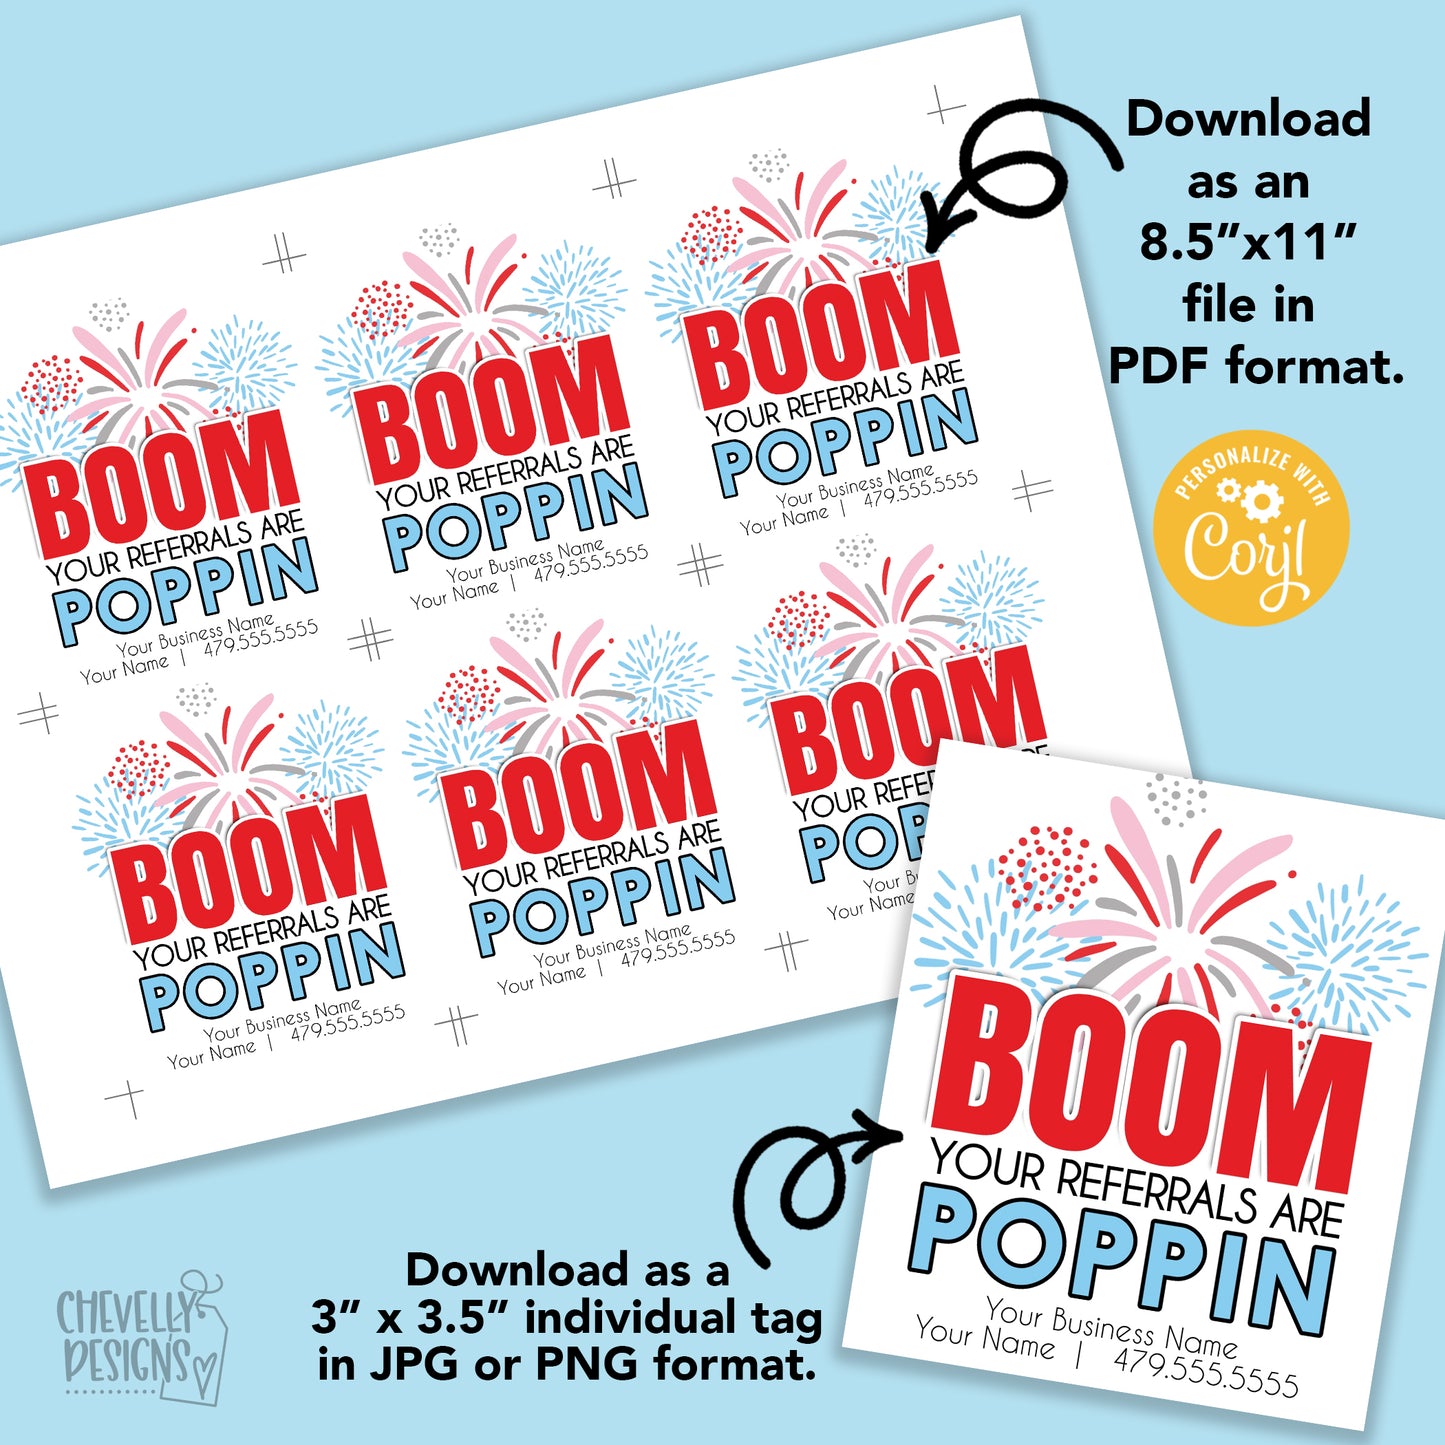 Editable - BOOM You're Referrals are Poppin - Business Marketing - Printable Digital File